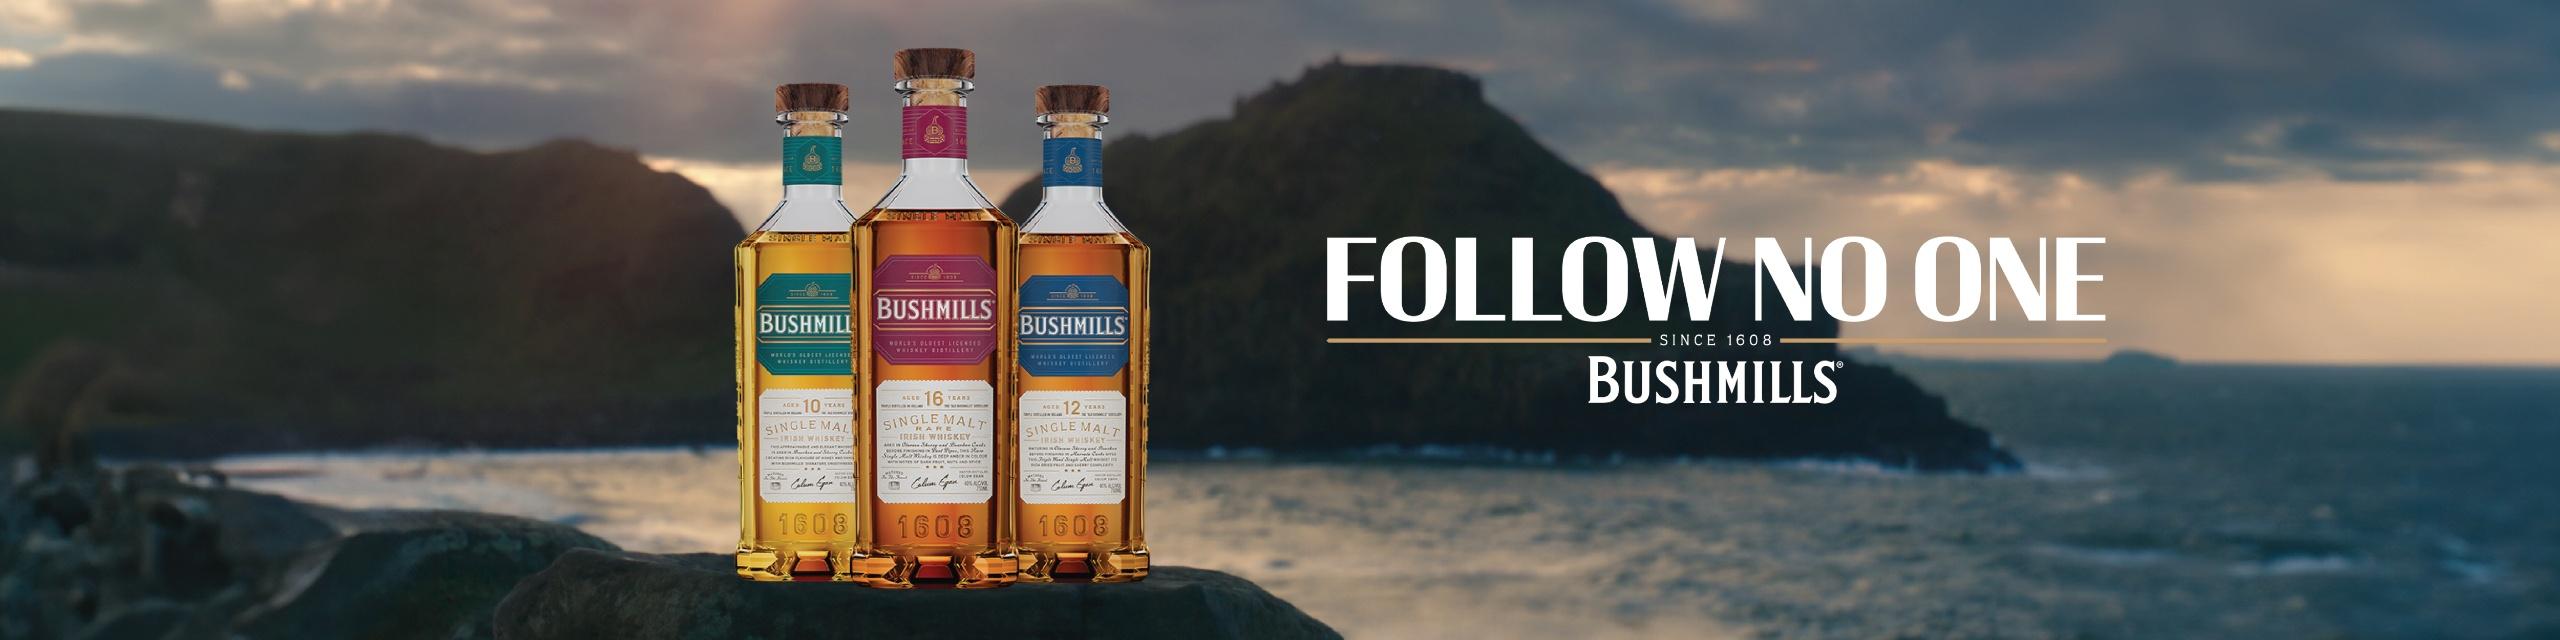 Bushmills® Blended and Single Malt whiskeys are steeped in 400-year-old tradition.  Bushmills® is the only Irish distillery to exclusively triple-distill single malt whiskey before entering the most prolific barrel aging and finishing program in Ireland. 
• Bushmills® offers Original, Black Bush® and Red Bush® whiskeys, which are high single malt, blended whiskeys with unique character. Its 100% single malt whiskeys are aged 10, 16 and 21 years for unmatched aroma, complexity and smoothness. (40% ABV – 80 proof)